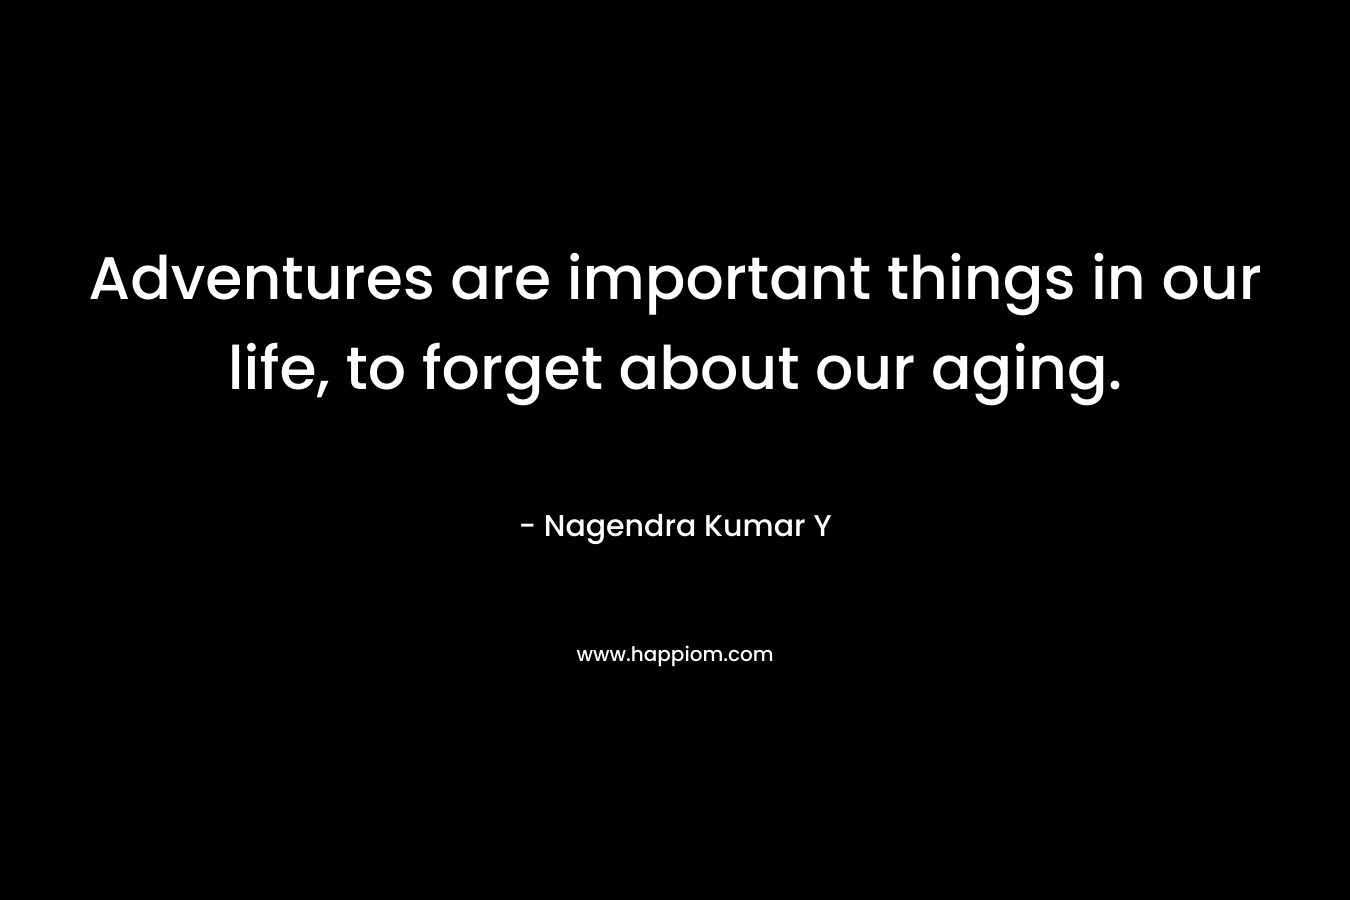 Adventures are important things in our life, to forget about our aging.